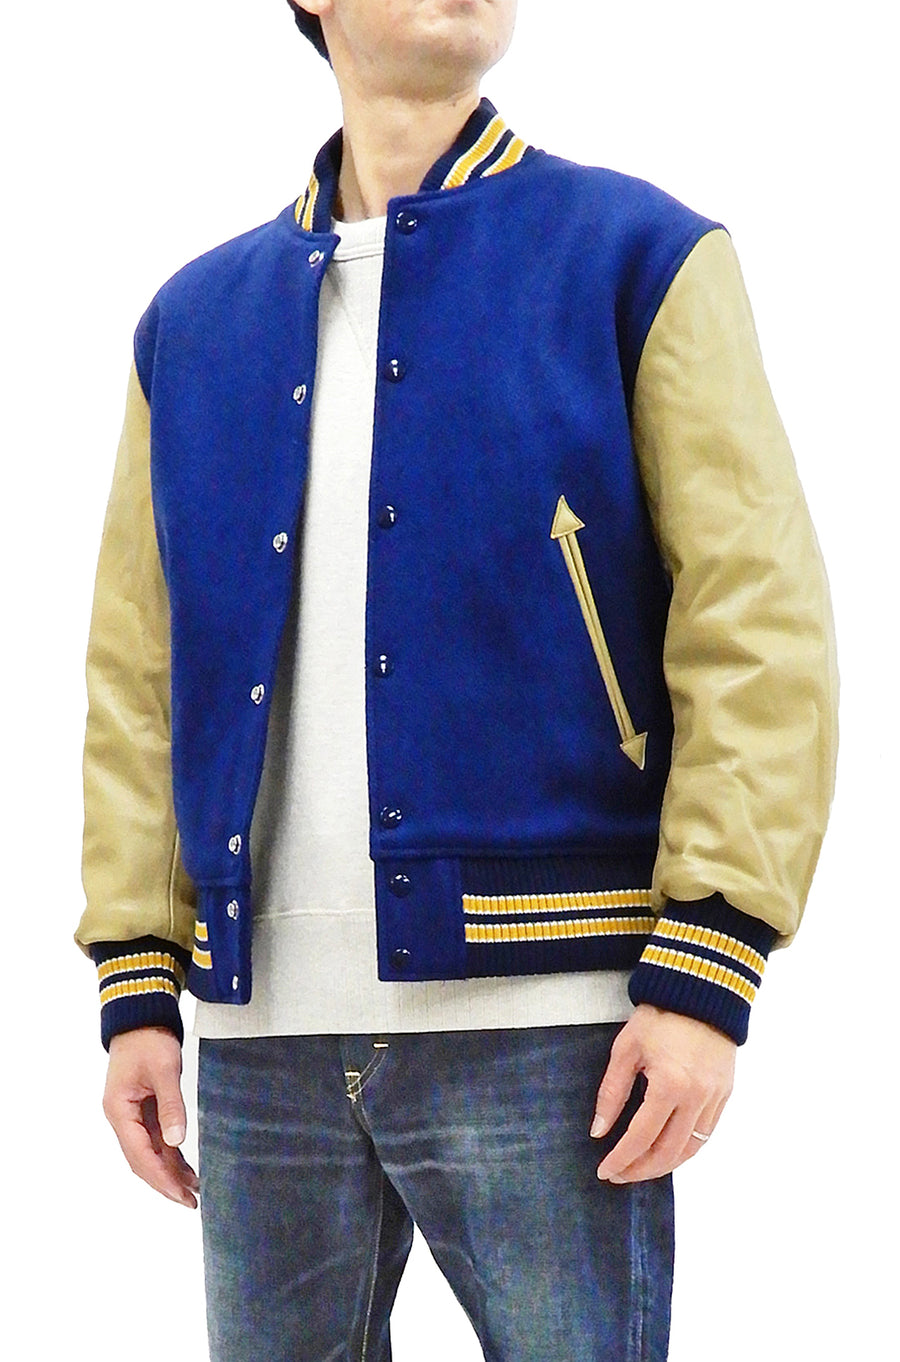 Men's Wool Black and Blue Varsity Jacket with Leather Sleeves